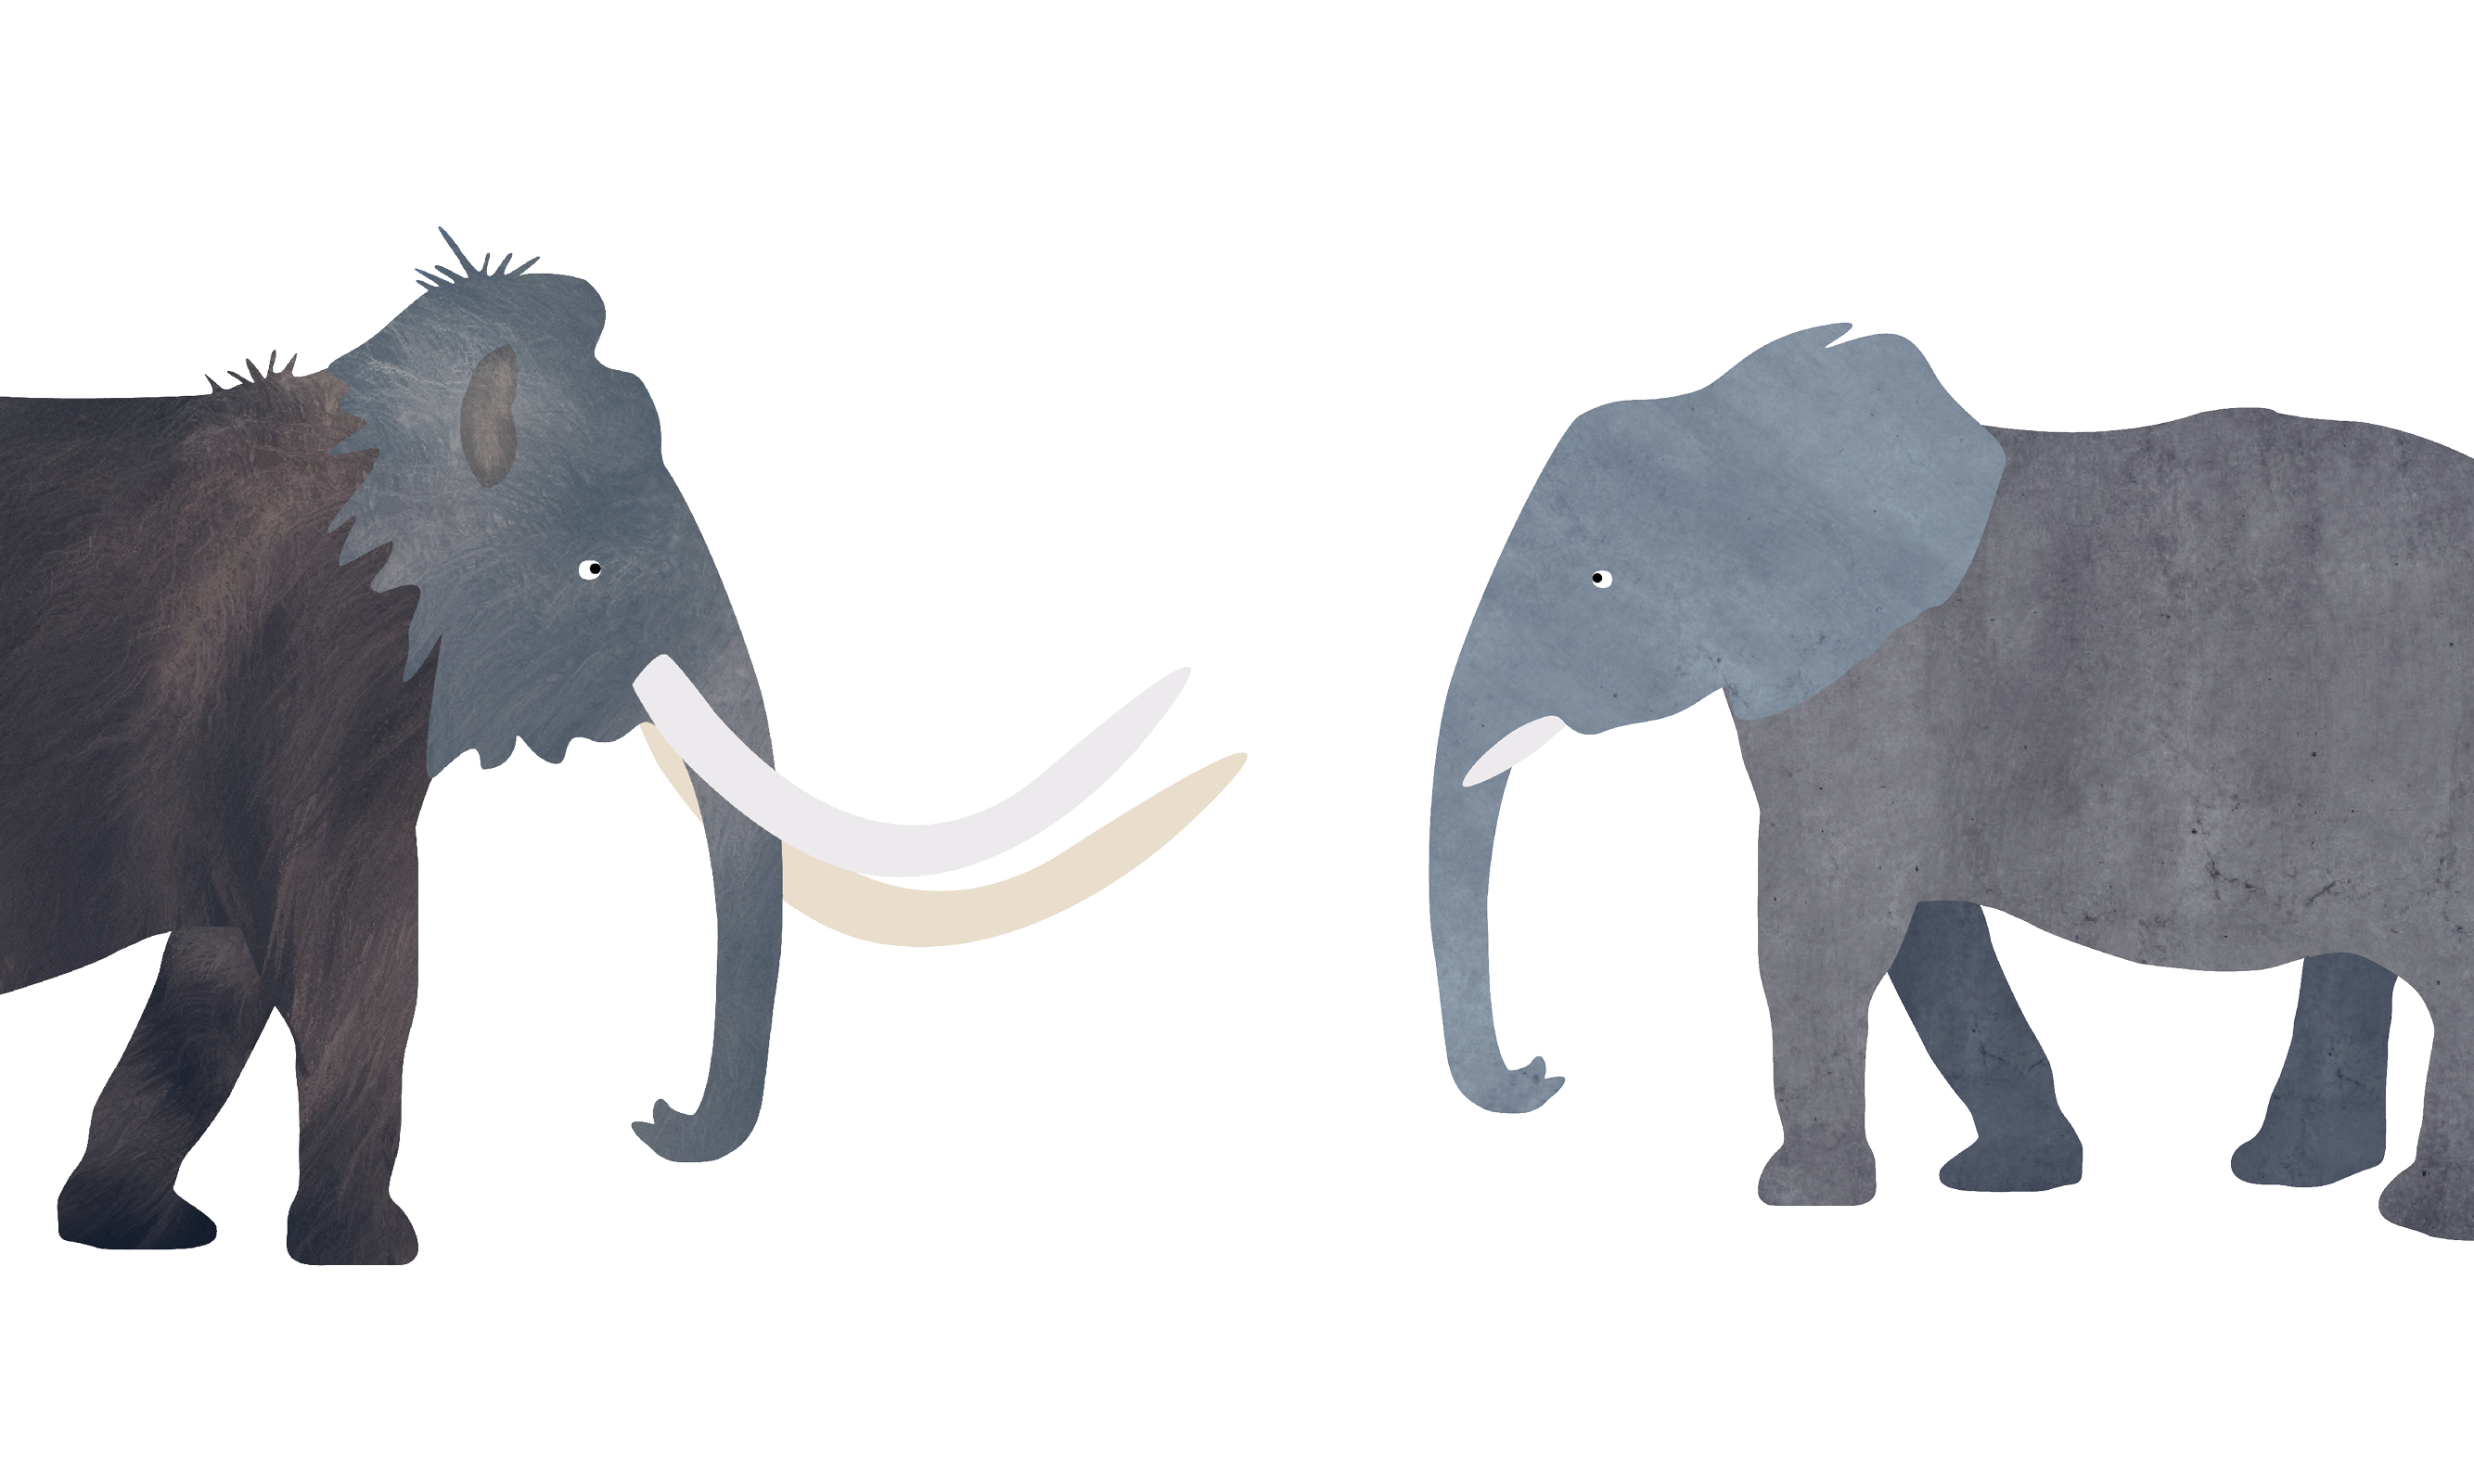 Illustration of a mammoth and elephant facing each other